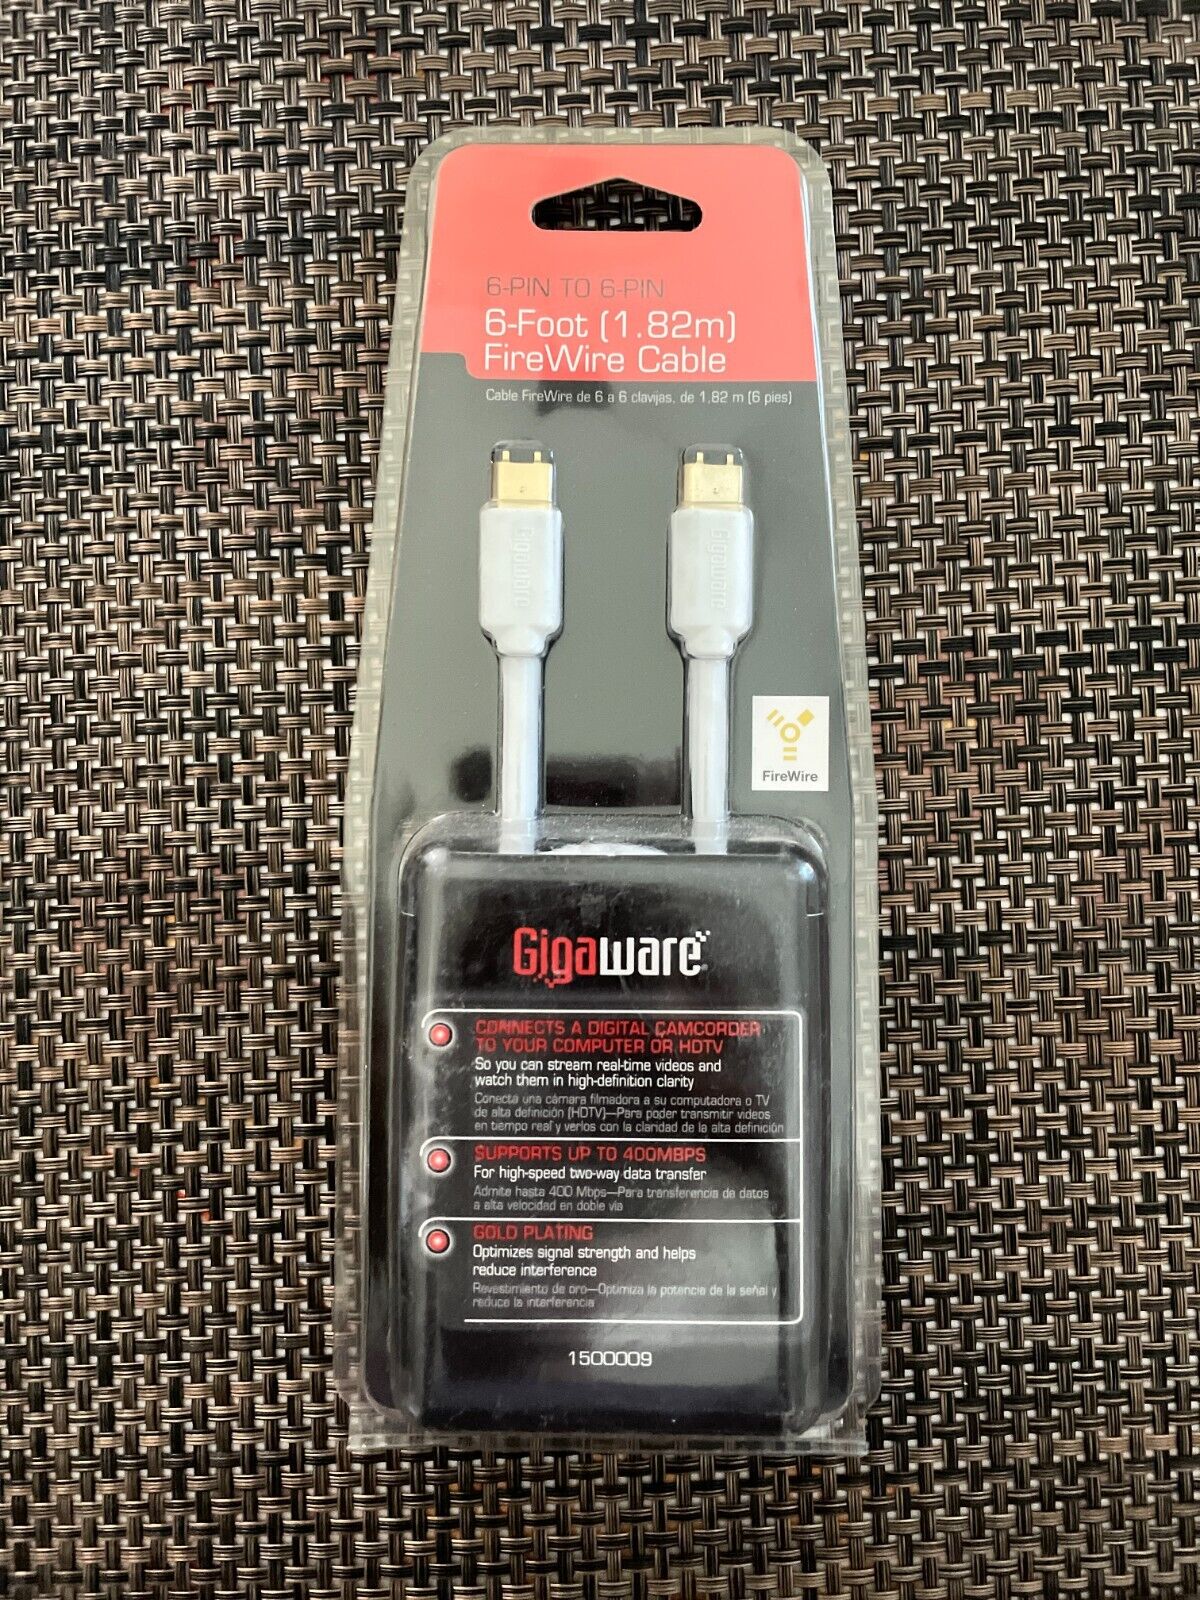 RadioShack Gigaware 6-Foot (1.82m) 6-Pin to 6-Pin FireWire Cable